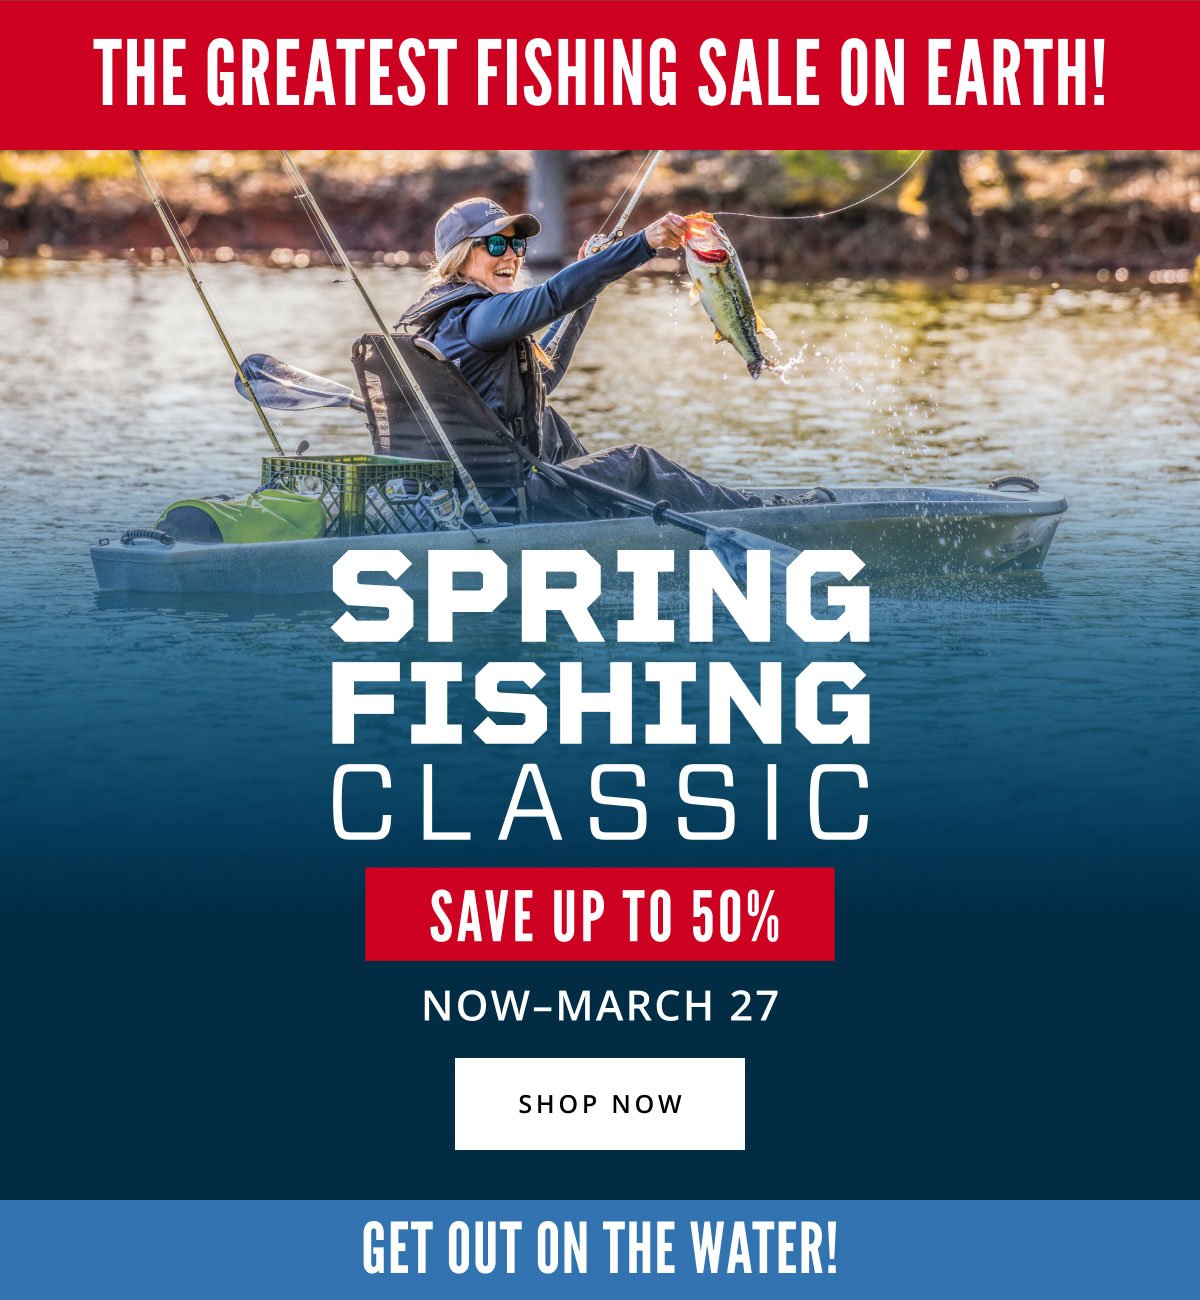 Cabelas: Stock Up & Save During The Spring Fishing Classic